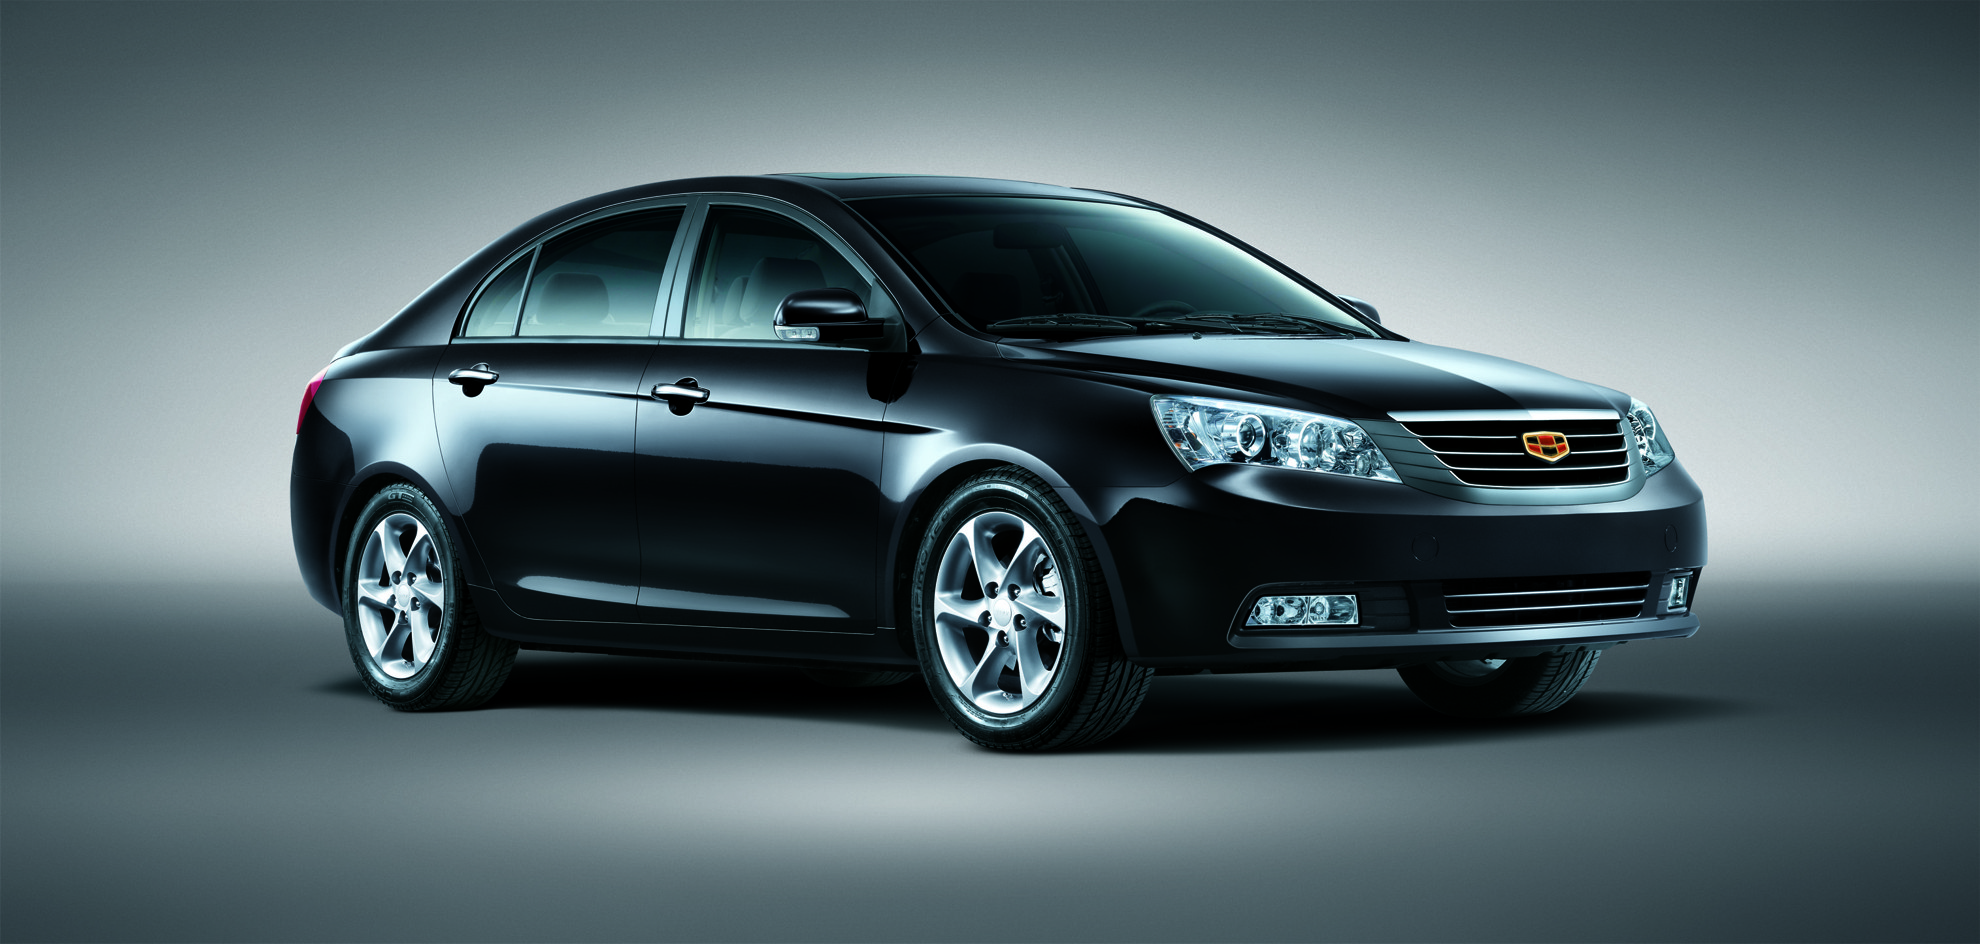 Geely EC7 to be launched in South Africa